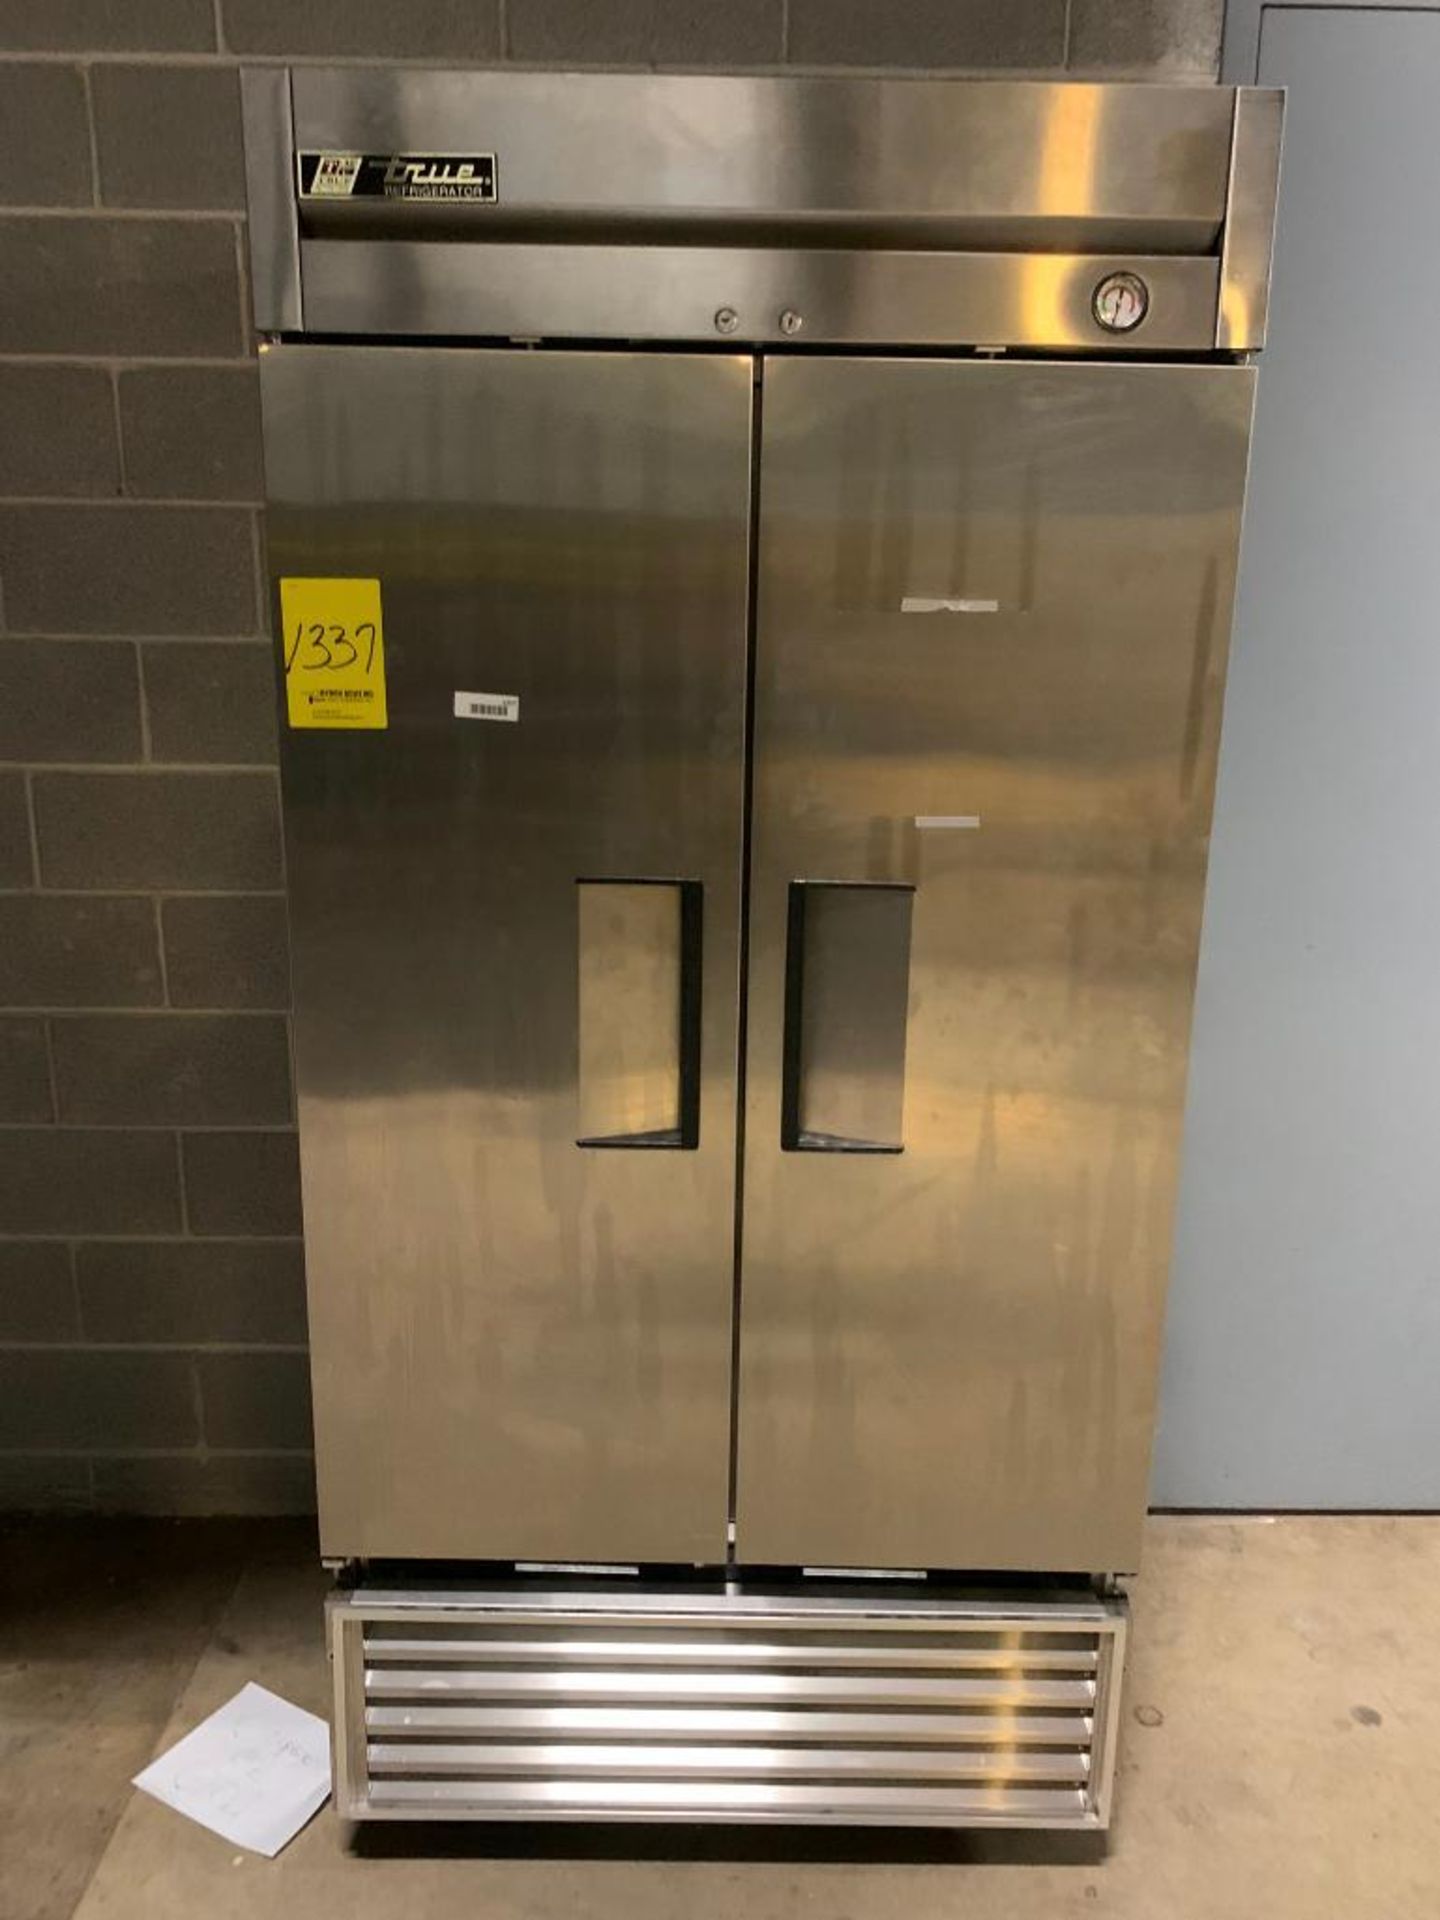 True Stainless Side by Side Refrigerator, Model T-35 - Image 2 of 3